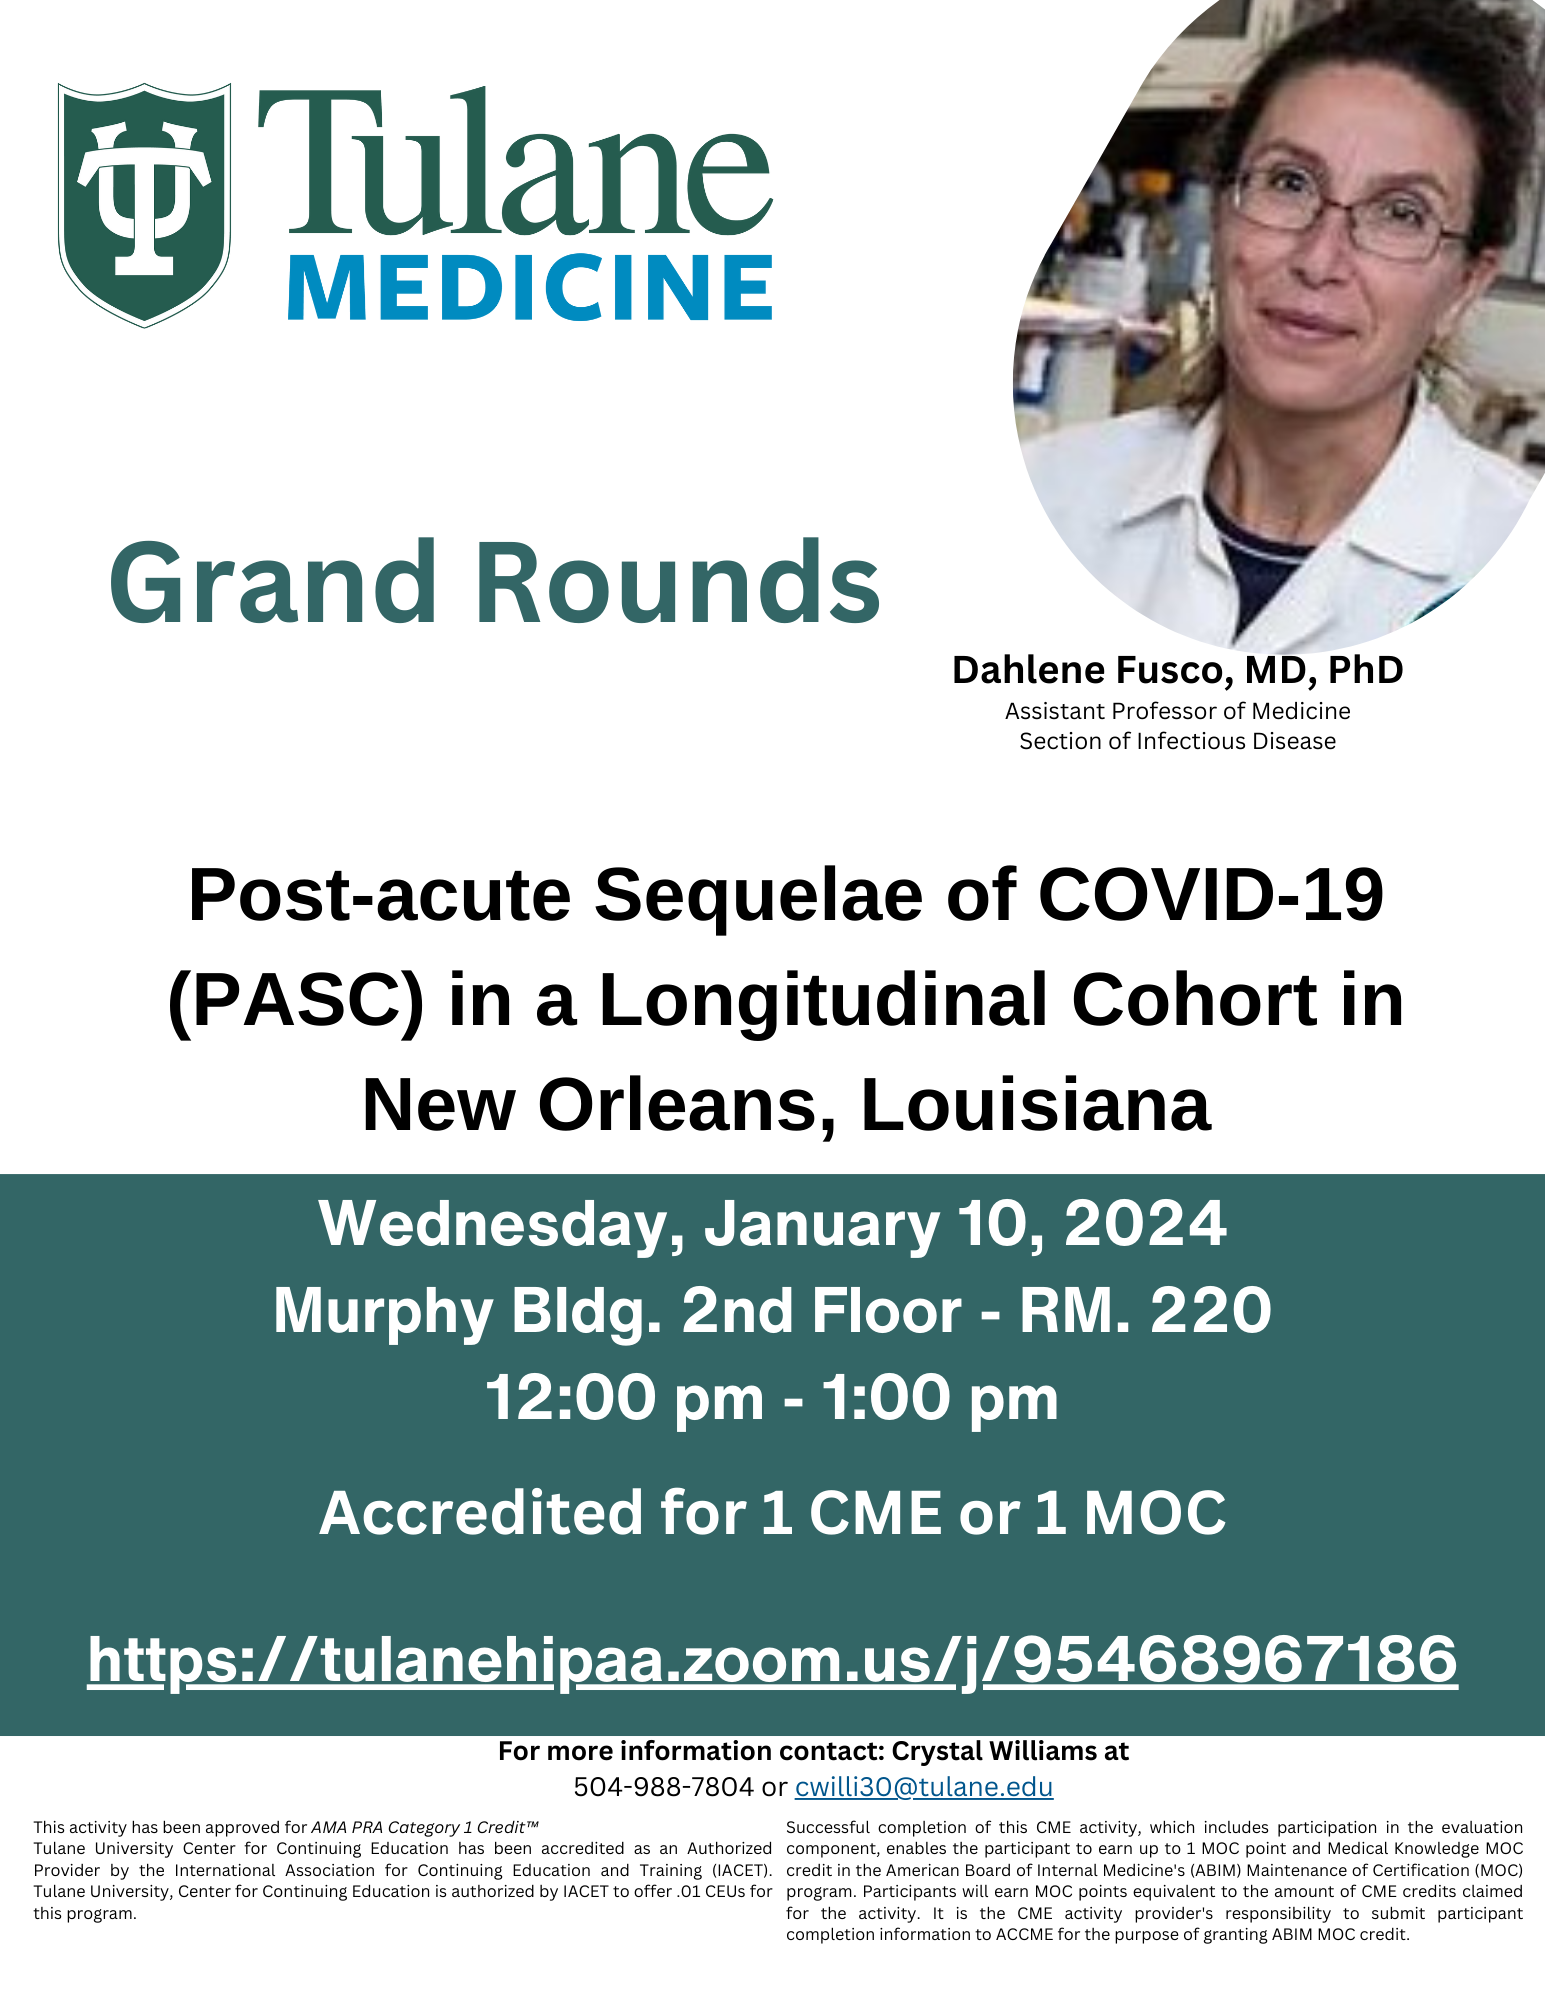 Dahlene Fusco, MD, PhD "Post-acute Sequelae of COVID-19 (PASC) In A Longitudinal Cohort in New Orleans